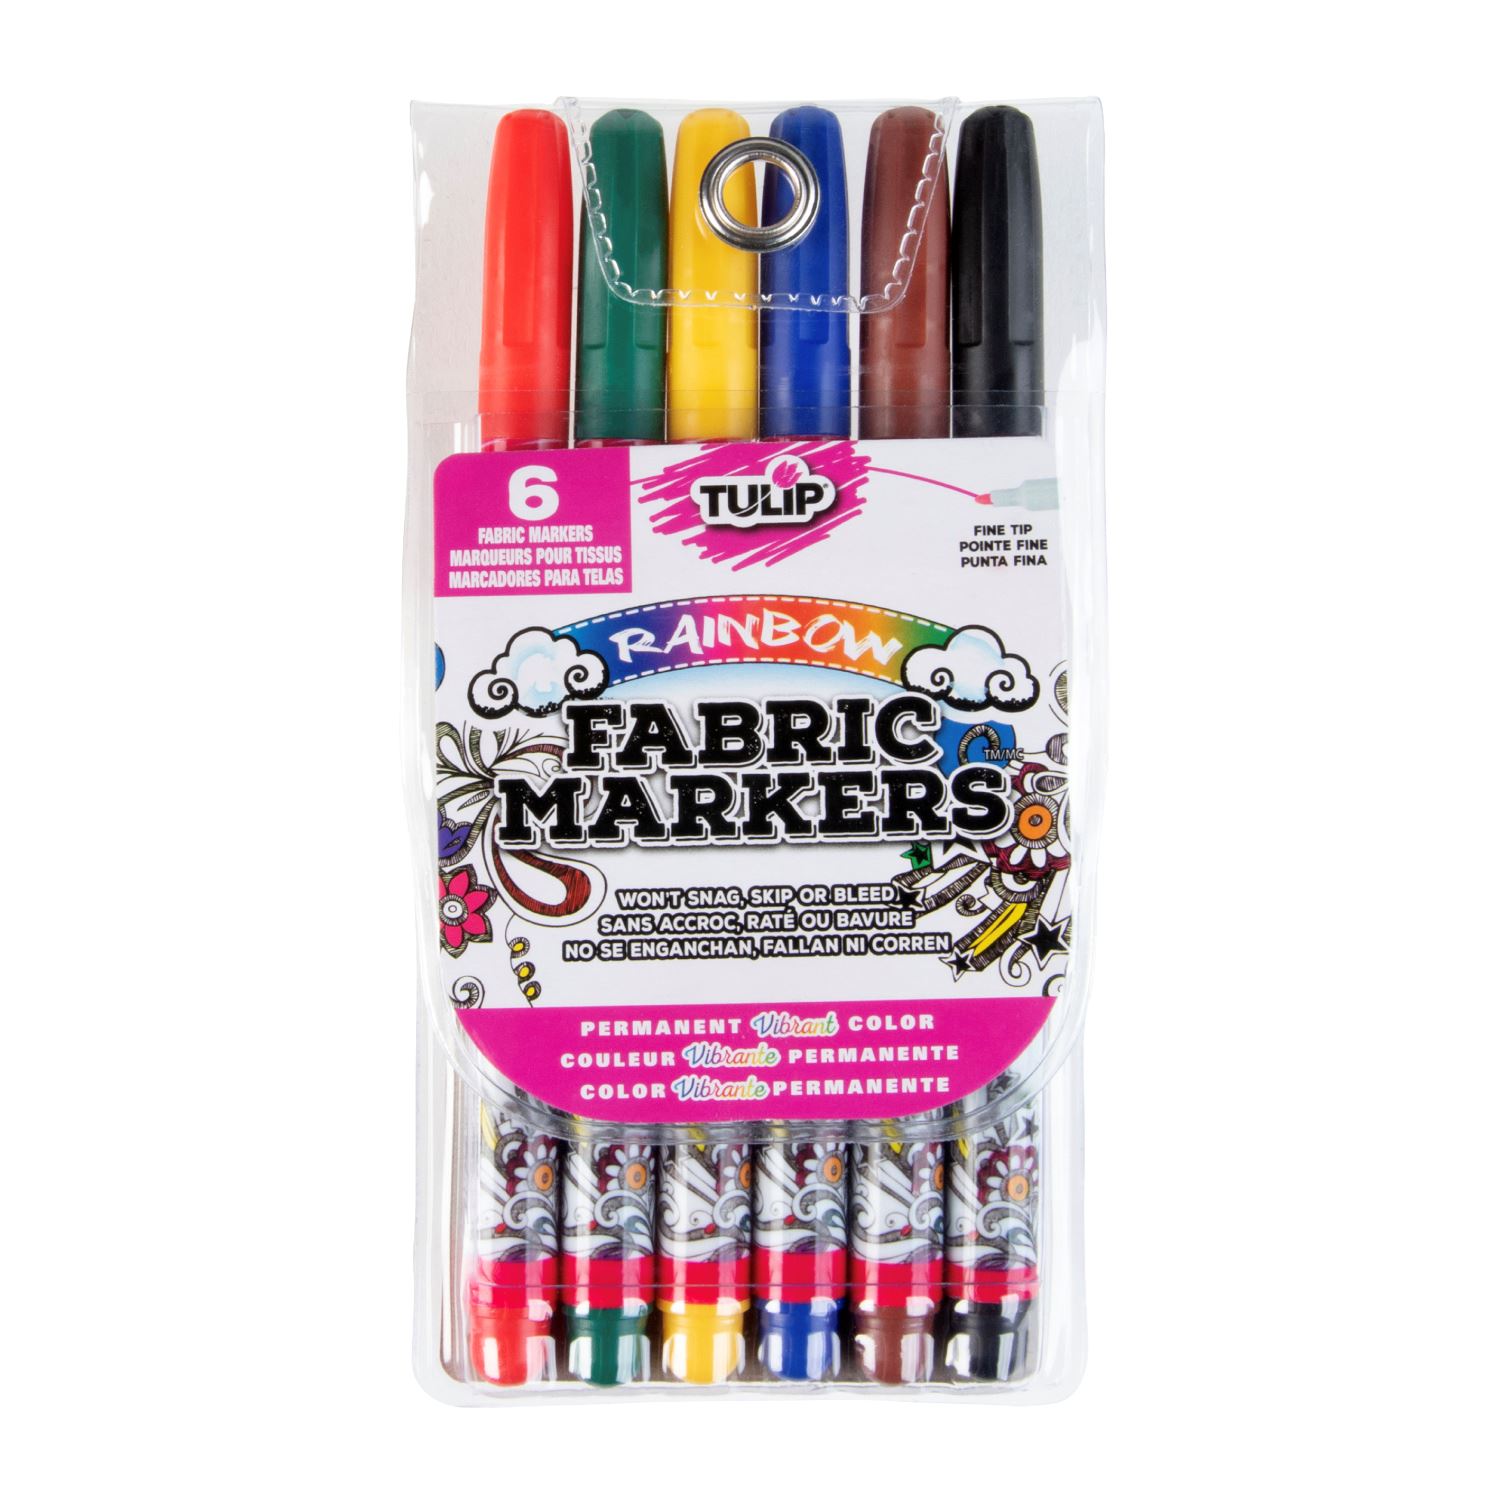 Fabric Markers, there are so many, what do I buy ?